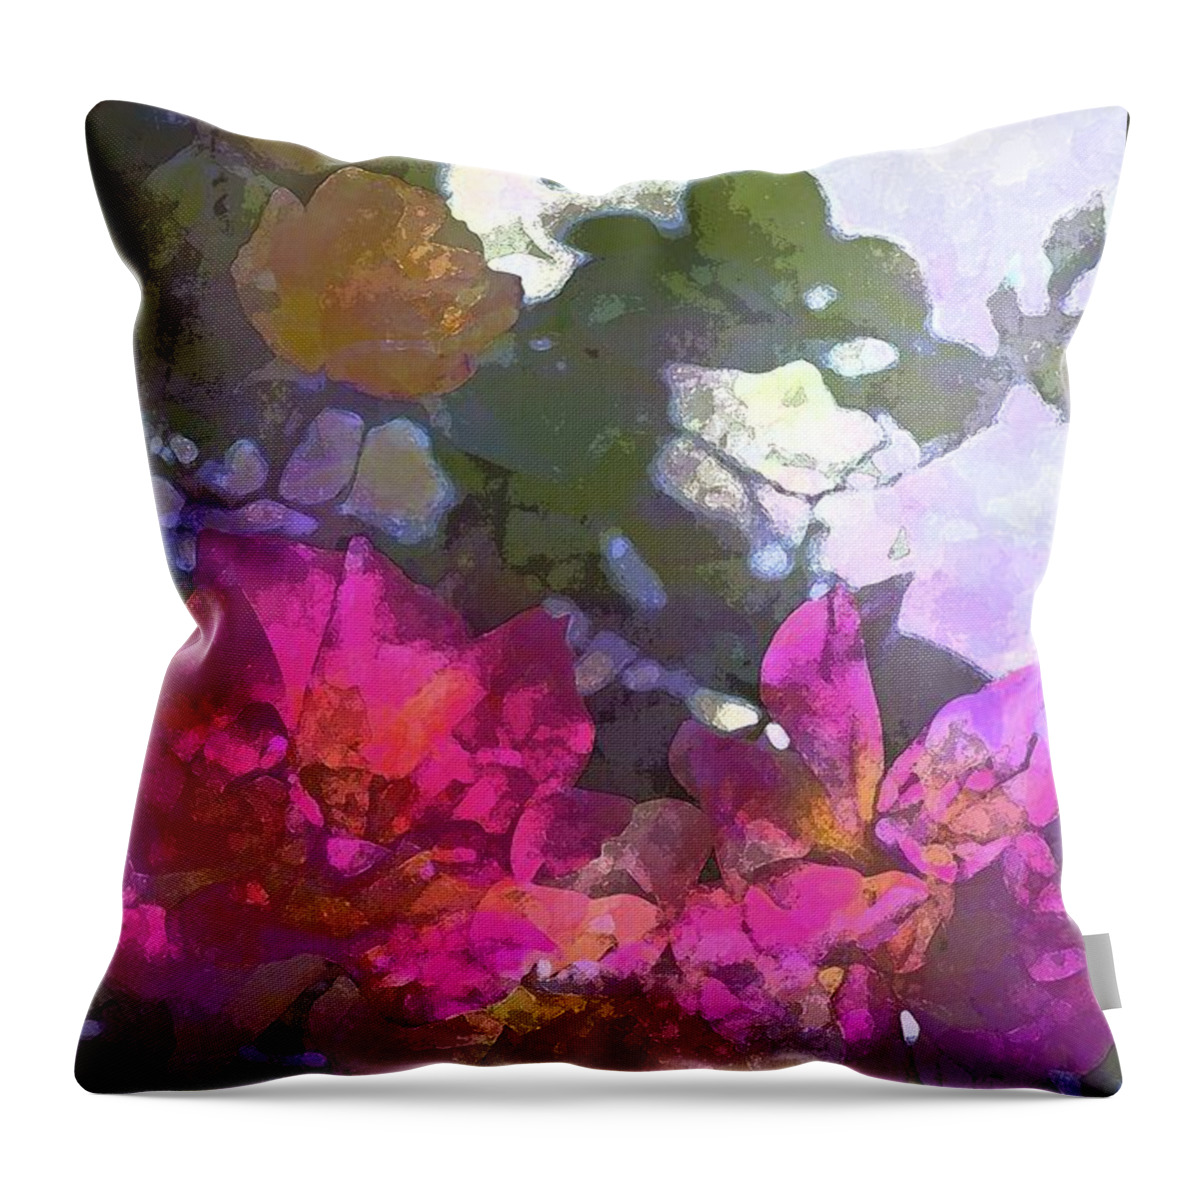 Floral Throw Pillow featuring the photograph Rose 206 by Pamela Cooper